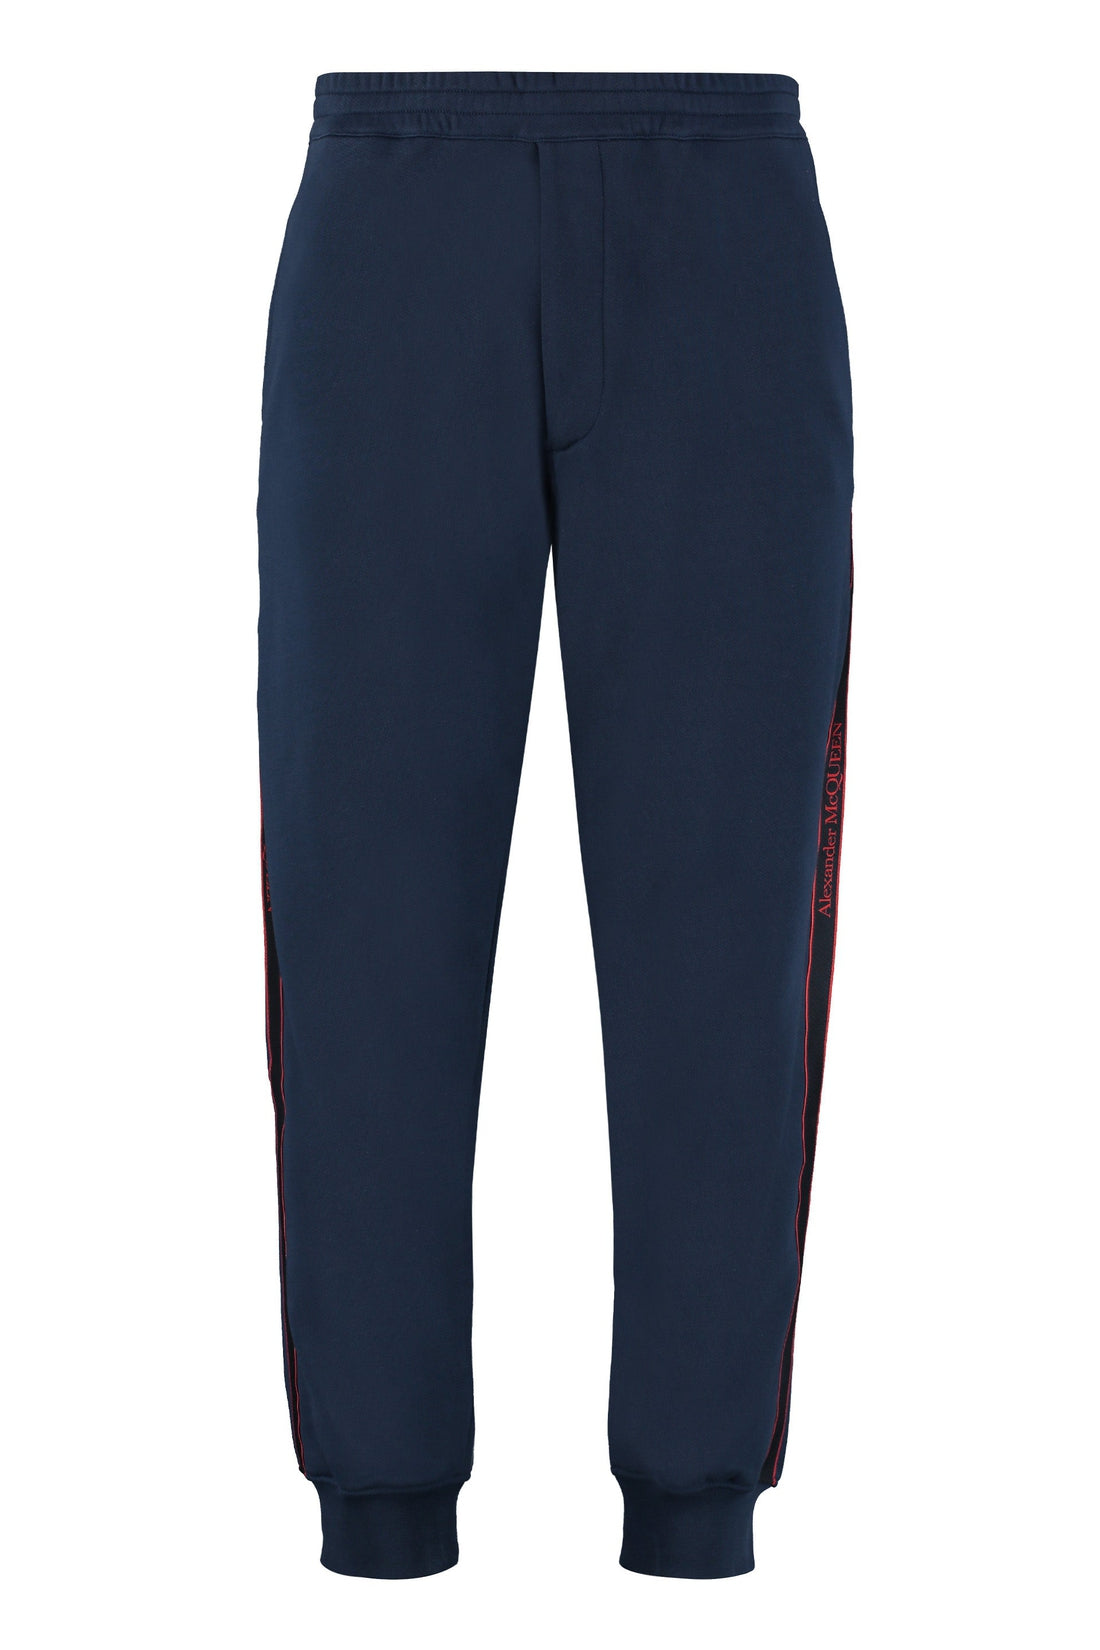 Alexander McQueen-OUTLET-SALE-Track-pants with side logo stripes-ARCHIVIST